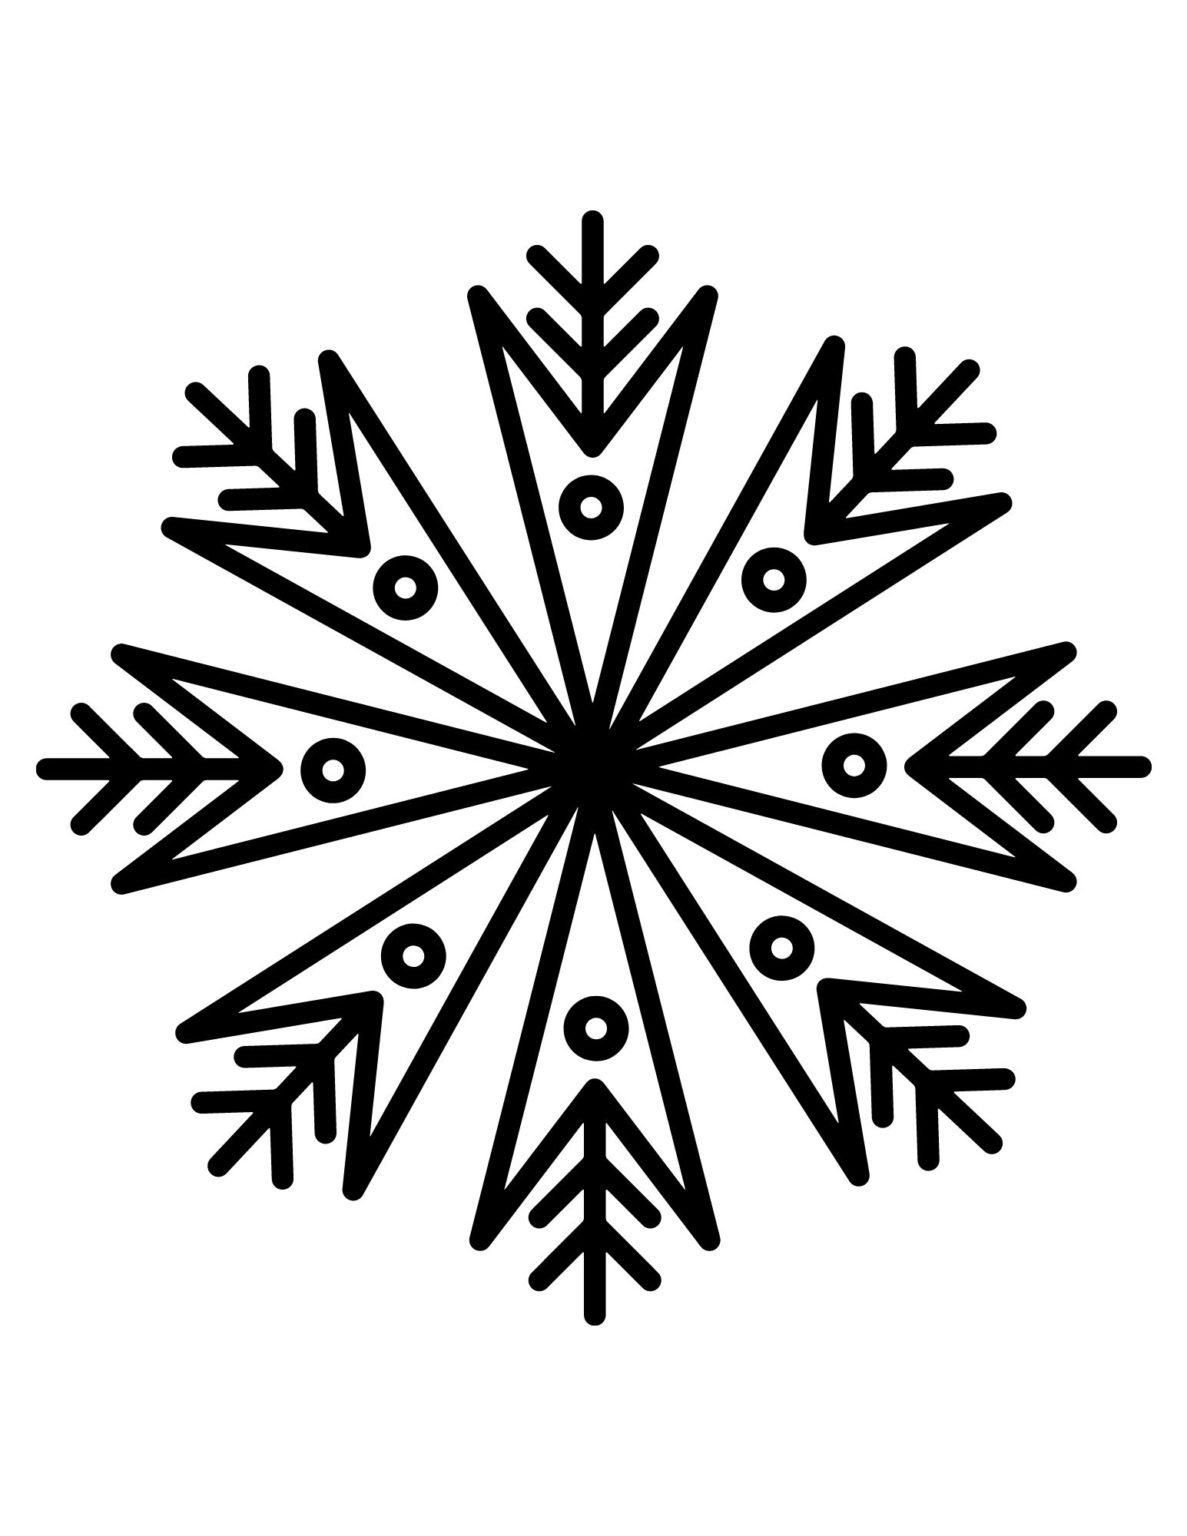 FREE Printable Snowflake Patterns (Large and Small Snowflakes ...